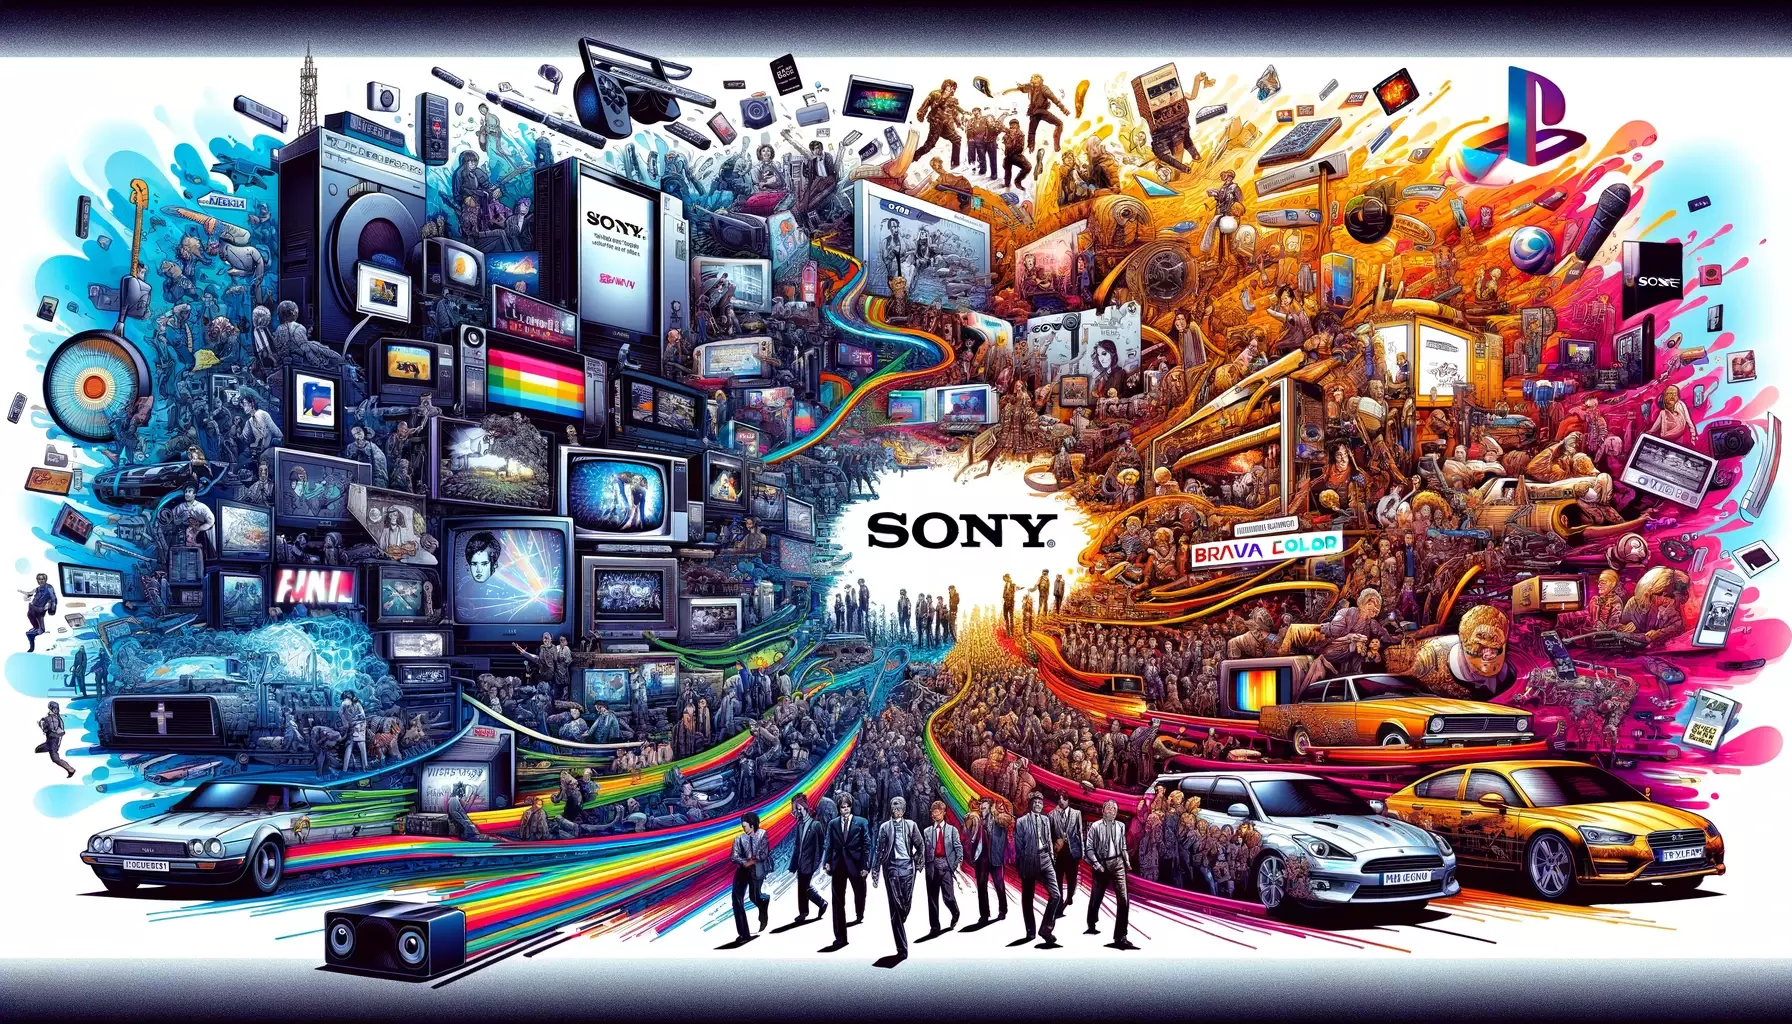 Sony's Brand Campaign